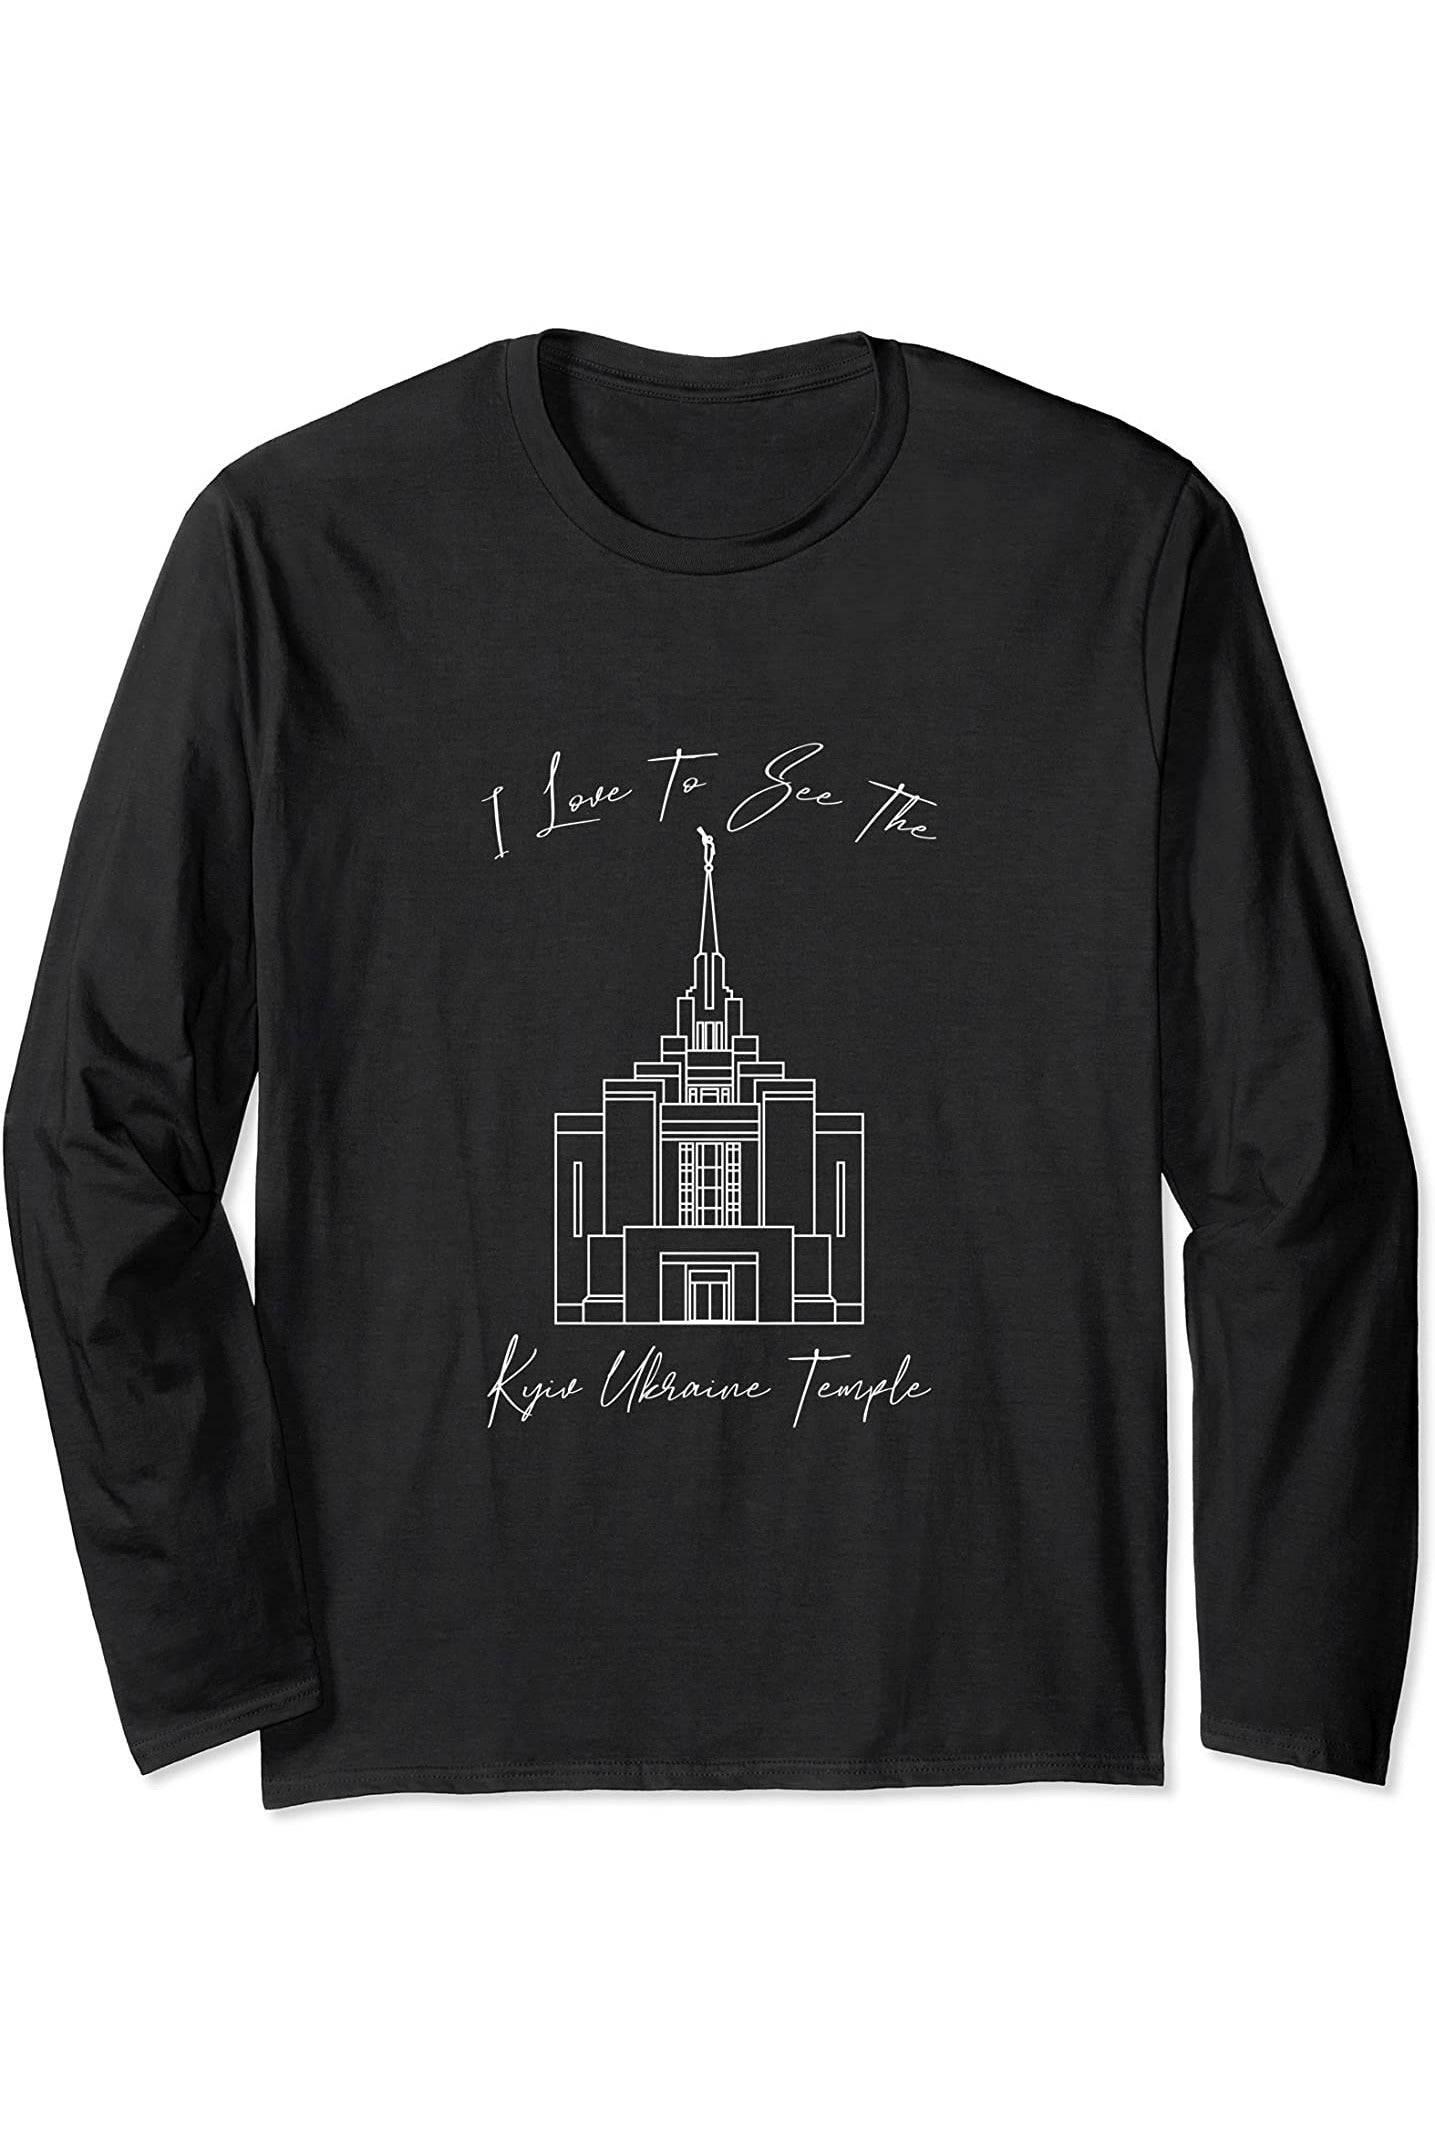 Kyiv Ukraine Tempel, I love to see my temple, calligraphy Long Sleeve T-Shirt